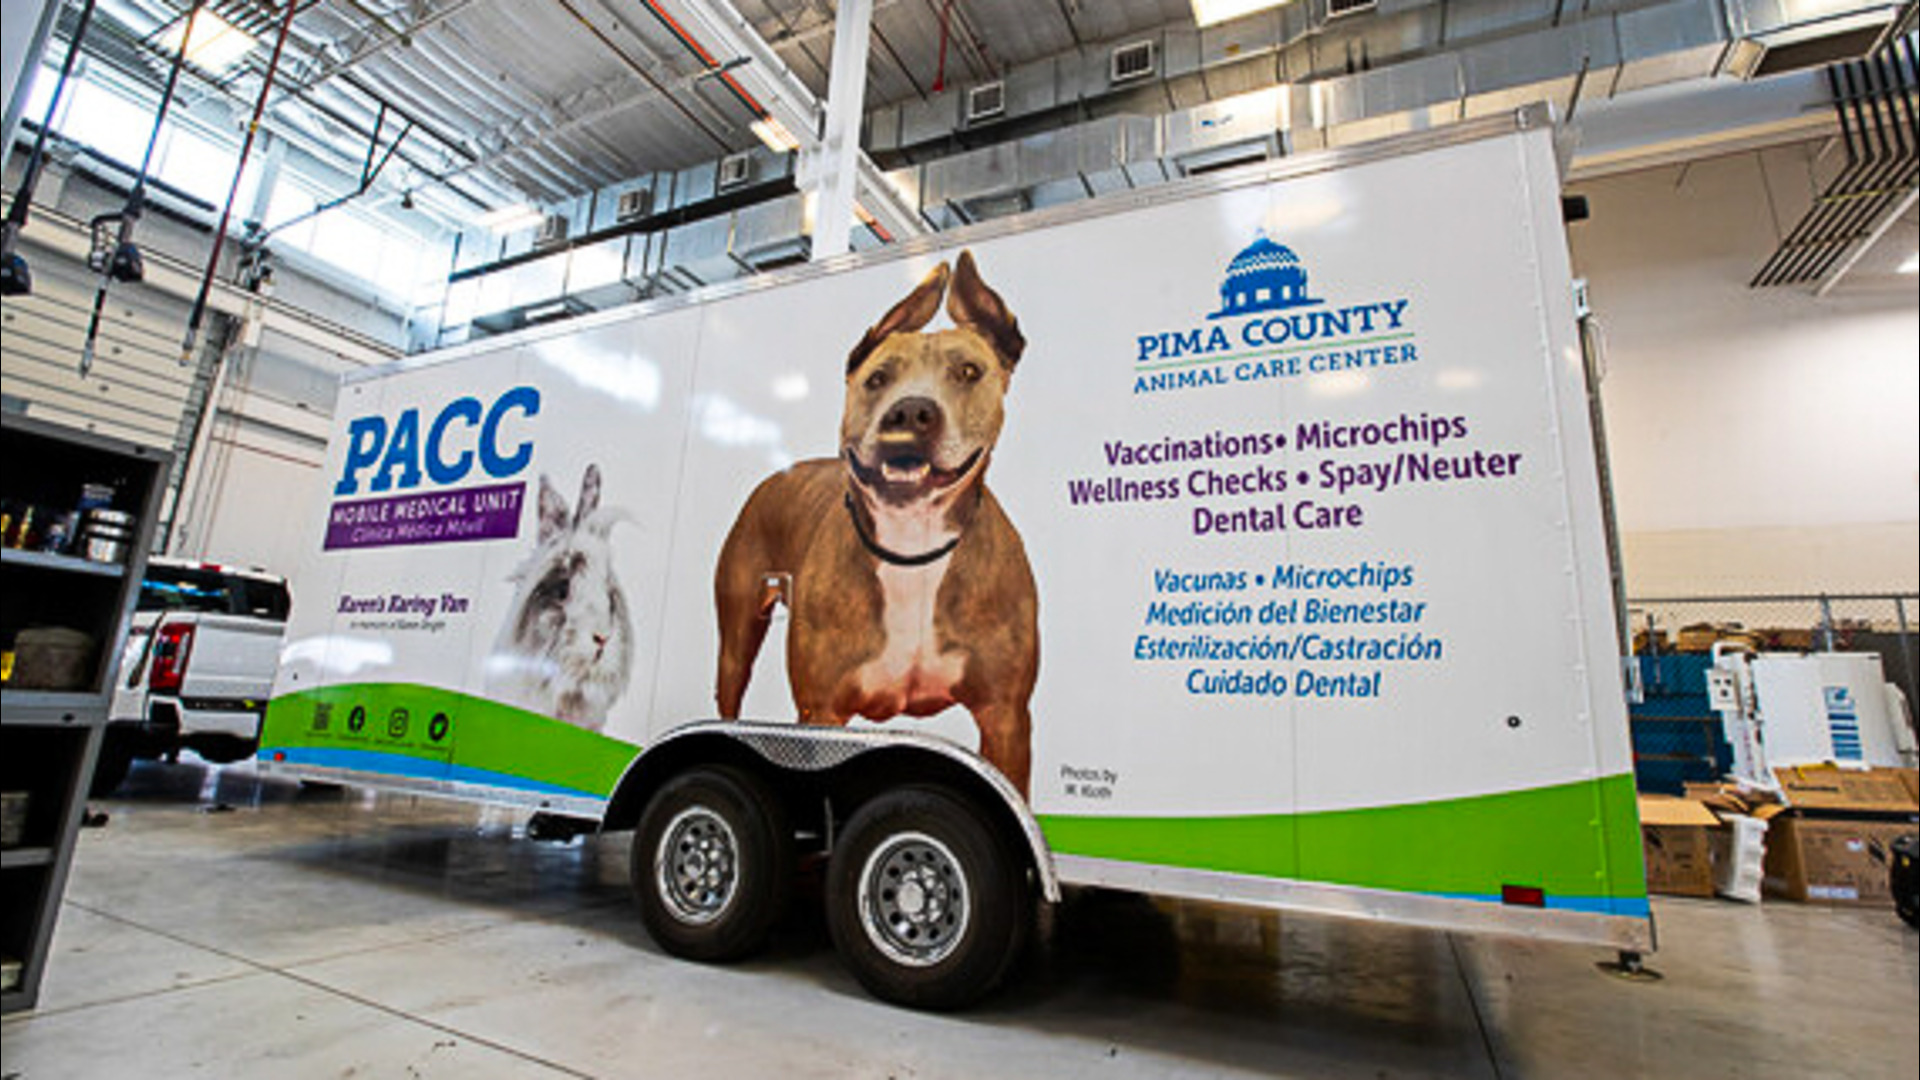 The mobile unit was purchased and donated to Pima County by the nonprofit organization Friends of PACC.